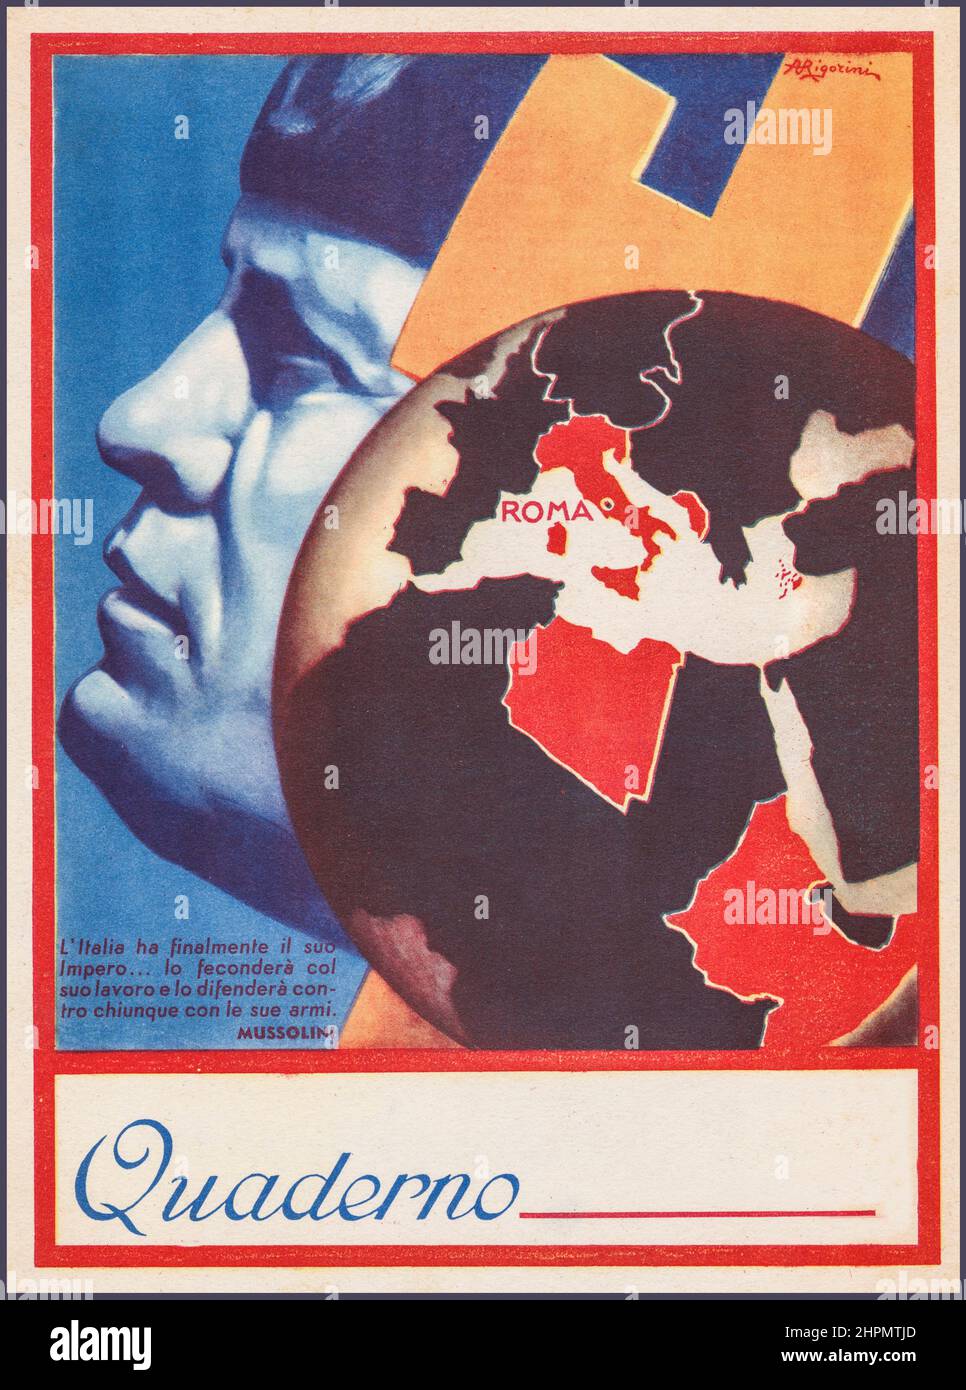 MUSSOLINI 1930s Italy Facist Propaganda Political Poster Card for Benito Mussolini and his Facist Party 'Italy finally has its empire and with its work will defend it against anyone with its weapons'  Facist Political Notes Poster  Benito Amilcare Andrea Mussolini was an Italian politician and journalist who founded and led the National Fascist Party. Stock Photo